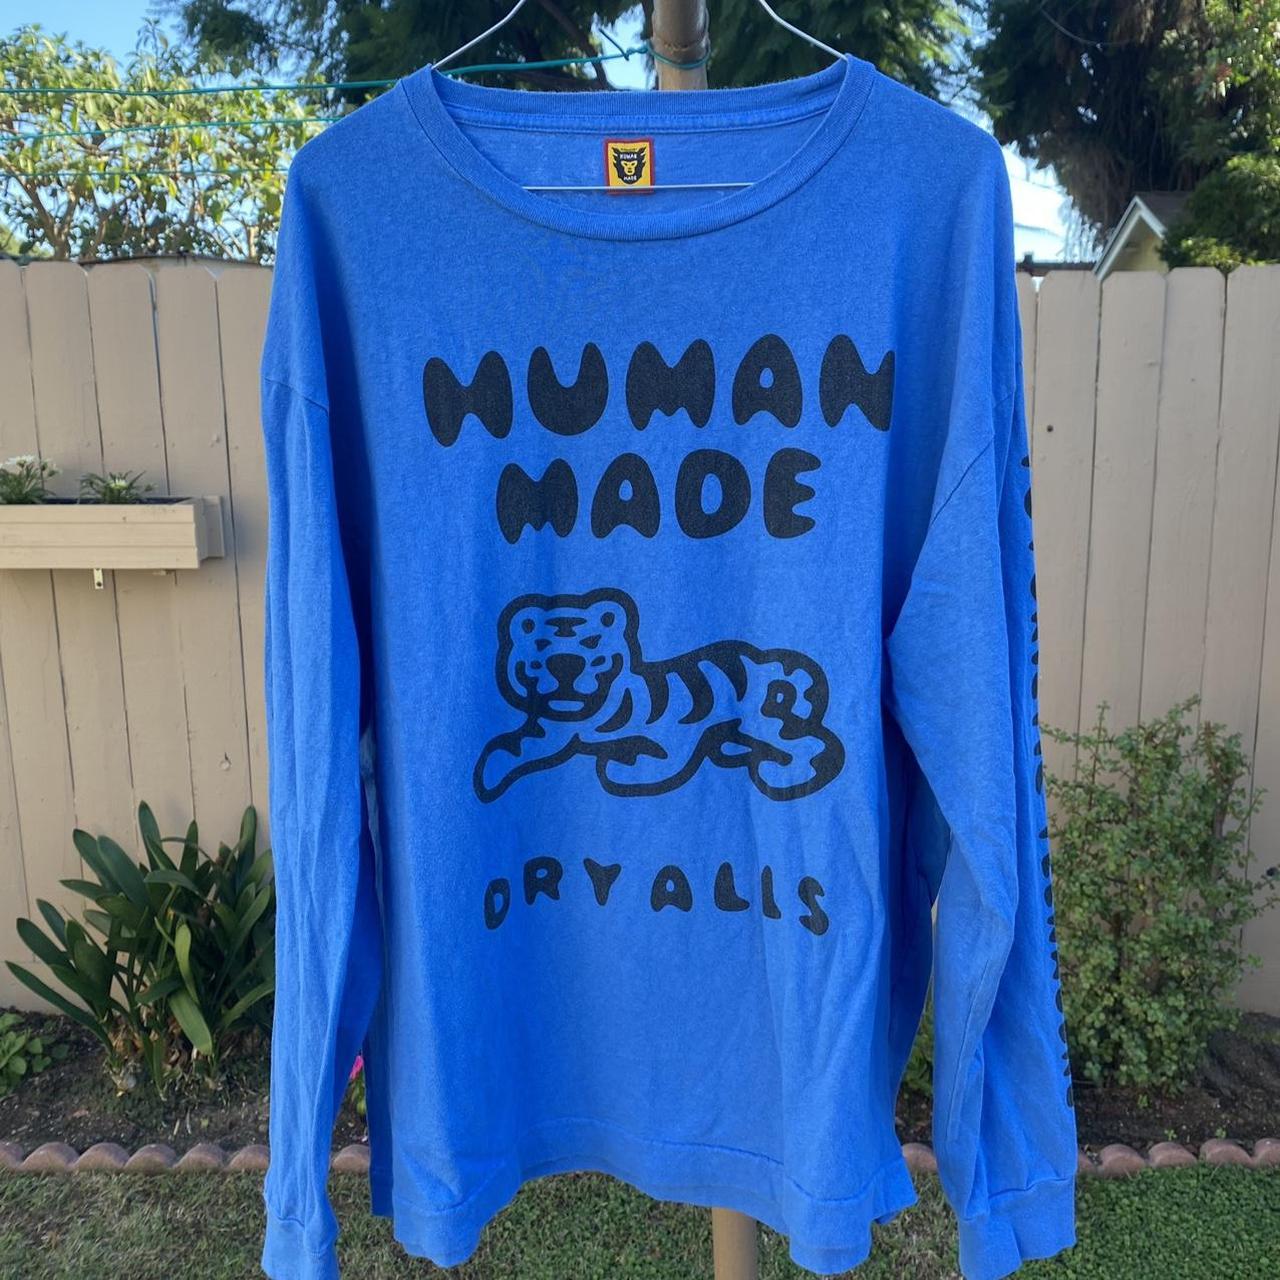 Product Image 1 - Human Made Dry Alls Blue